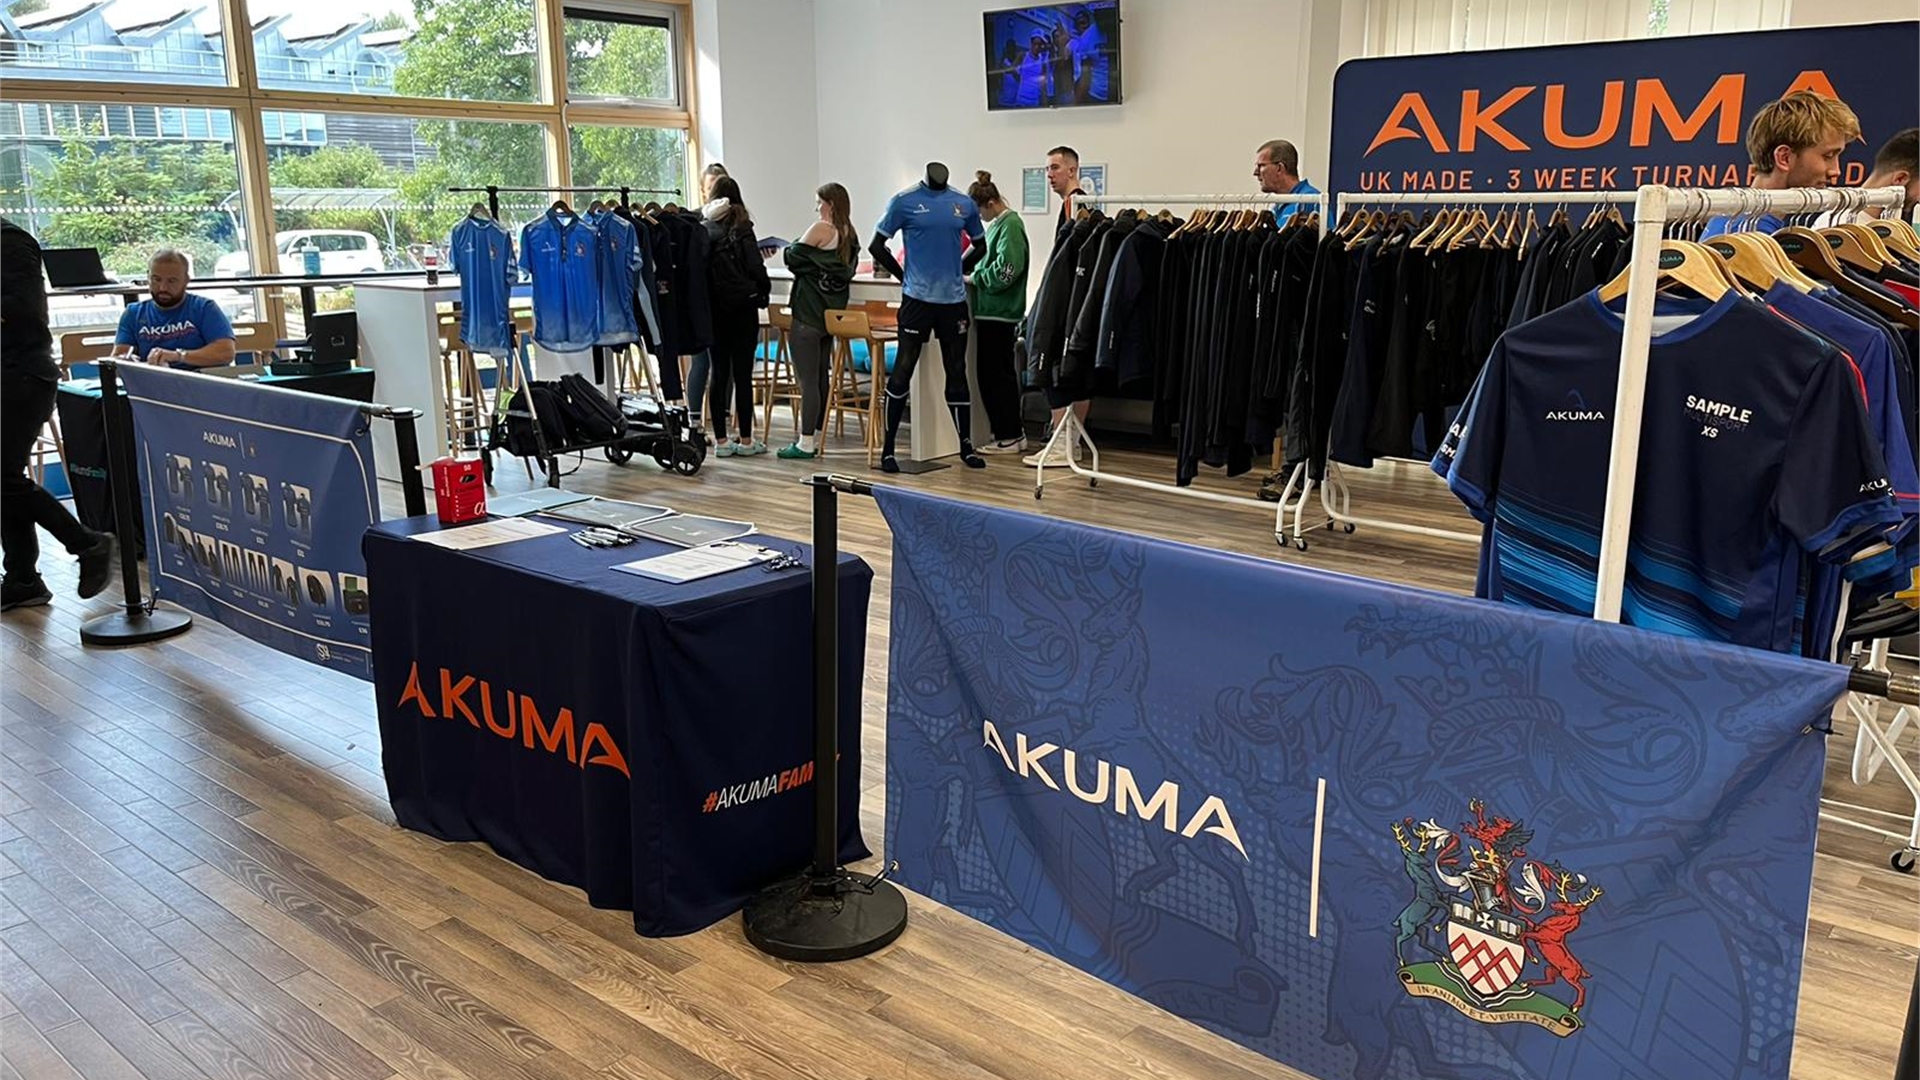 A photo of an Akuma sizing session in the SU